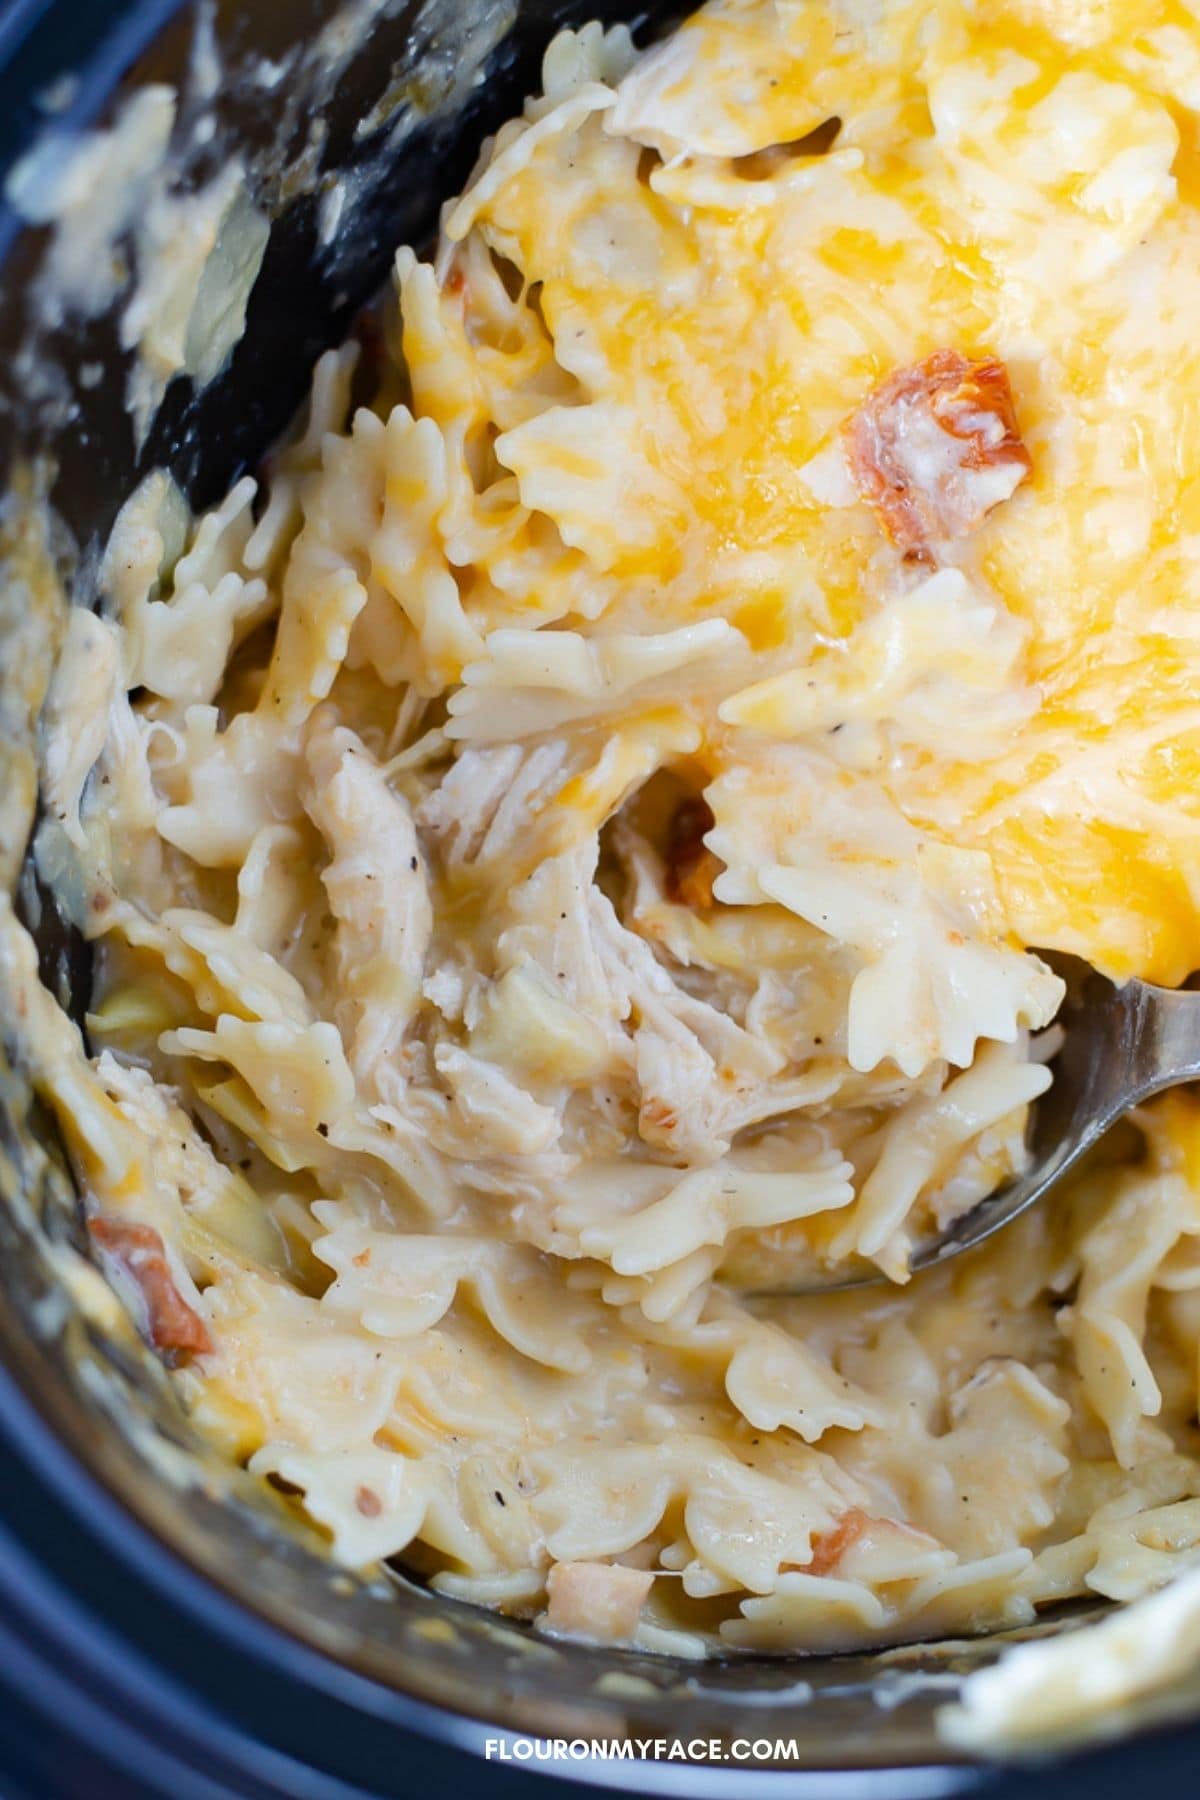 Overhead view of crock pot casserole with melted cheese on top.